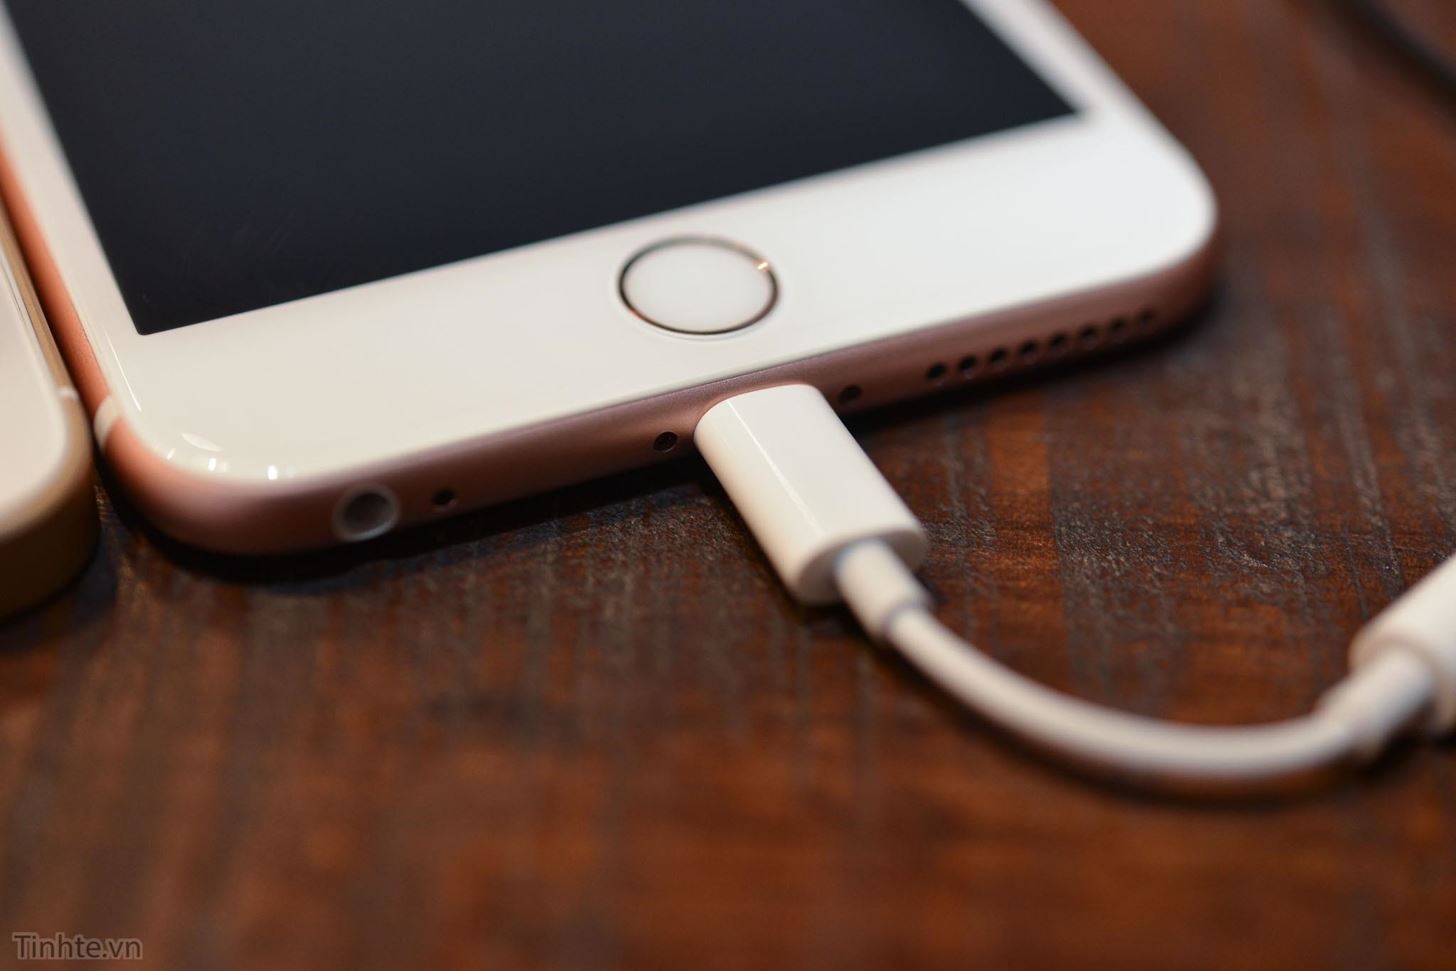 Finally, Real Proof That the iPhone 7 Will Come with a Headphones Lightning Adapter